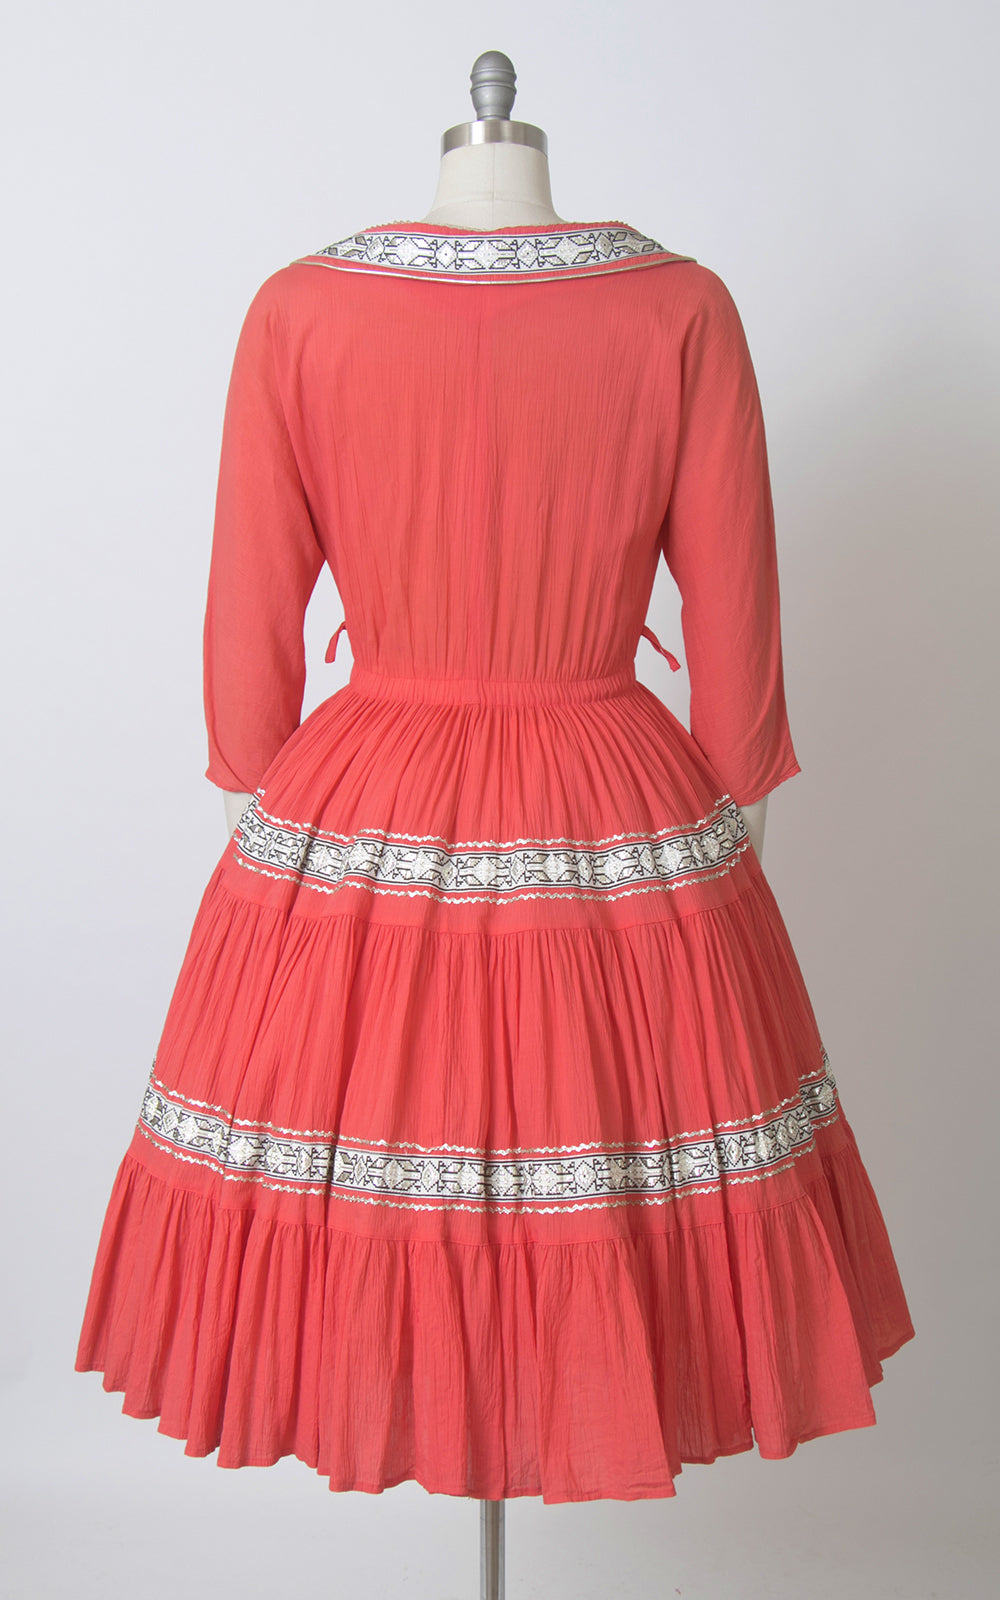 💐 SPRING CLEAROUT 💐 1950s Pink Ric Rac Circle Skirt Patio Dress | small/medium